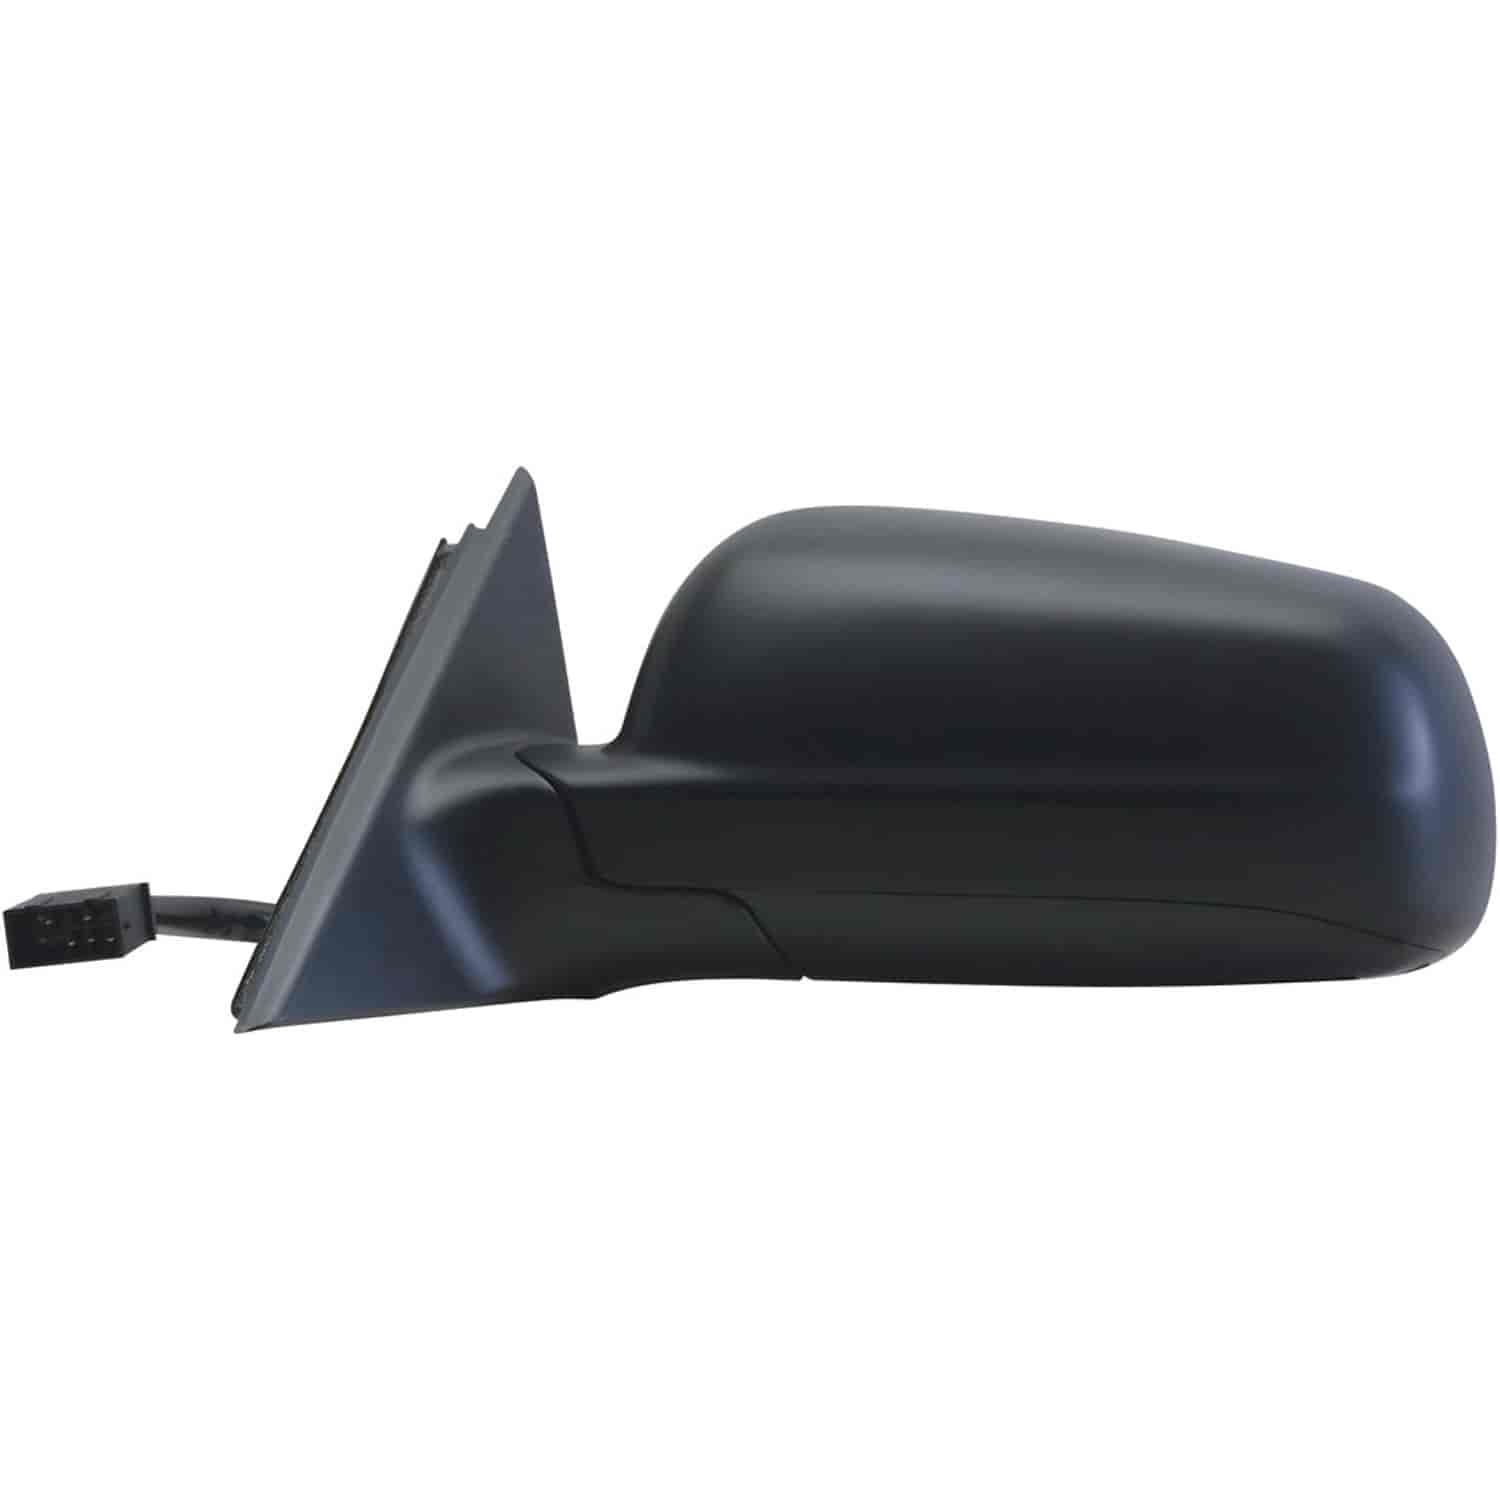 OEM Style Replacement mirror for 01-04 VW Passat w/o memory driver side mirror tested to fit and fun